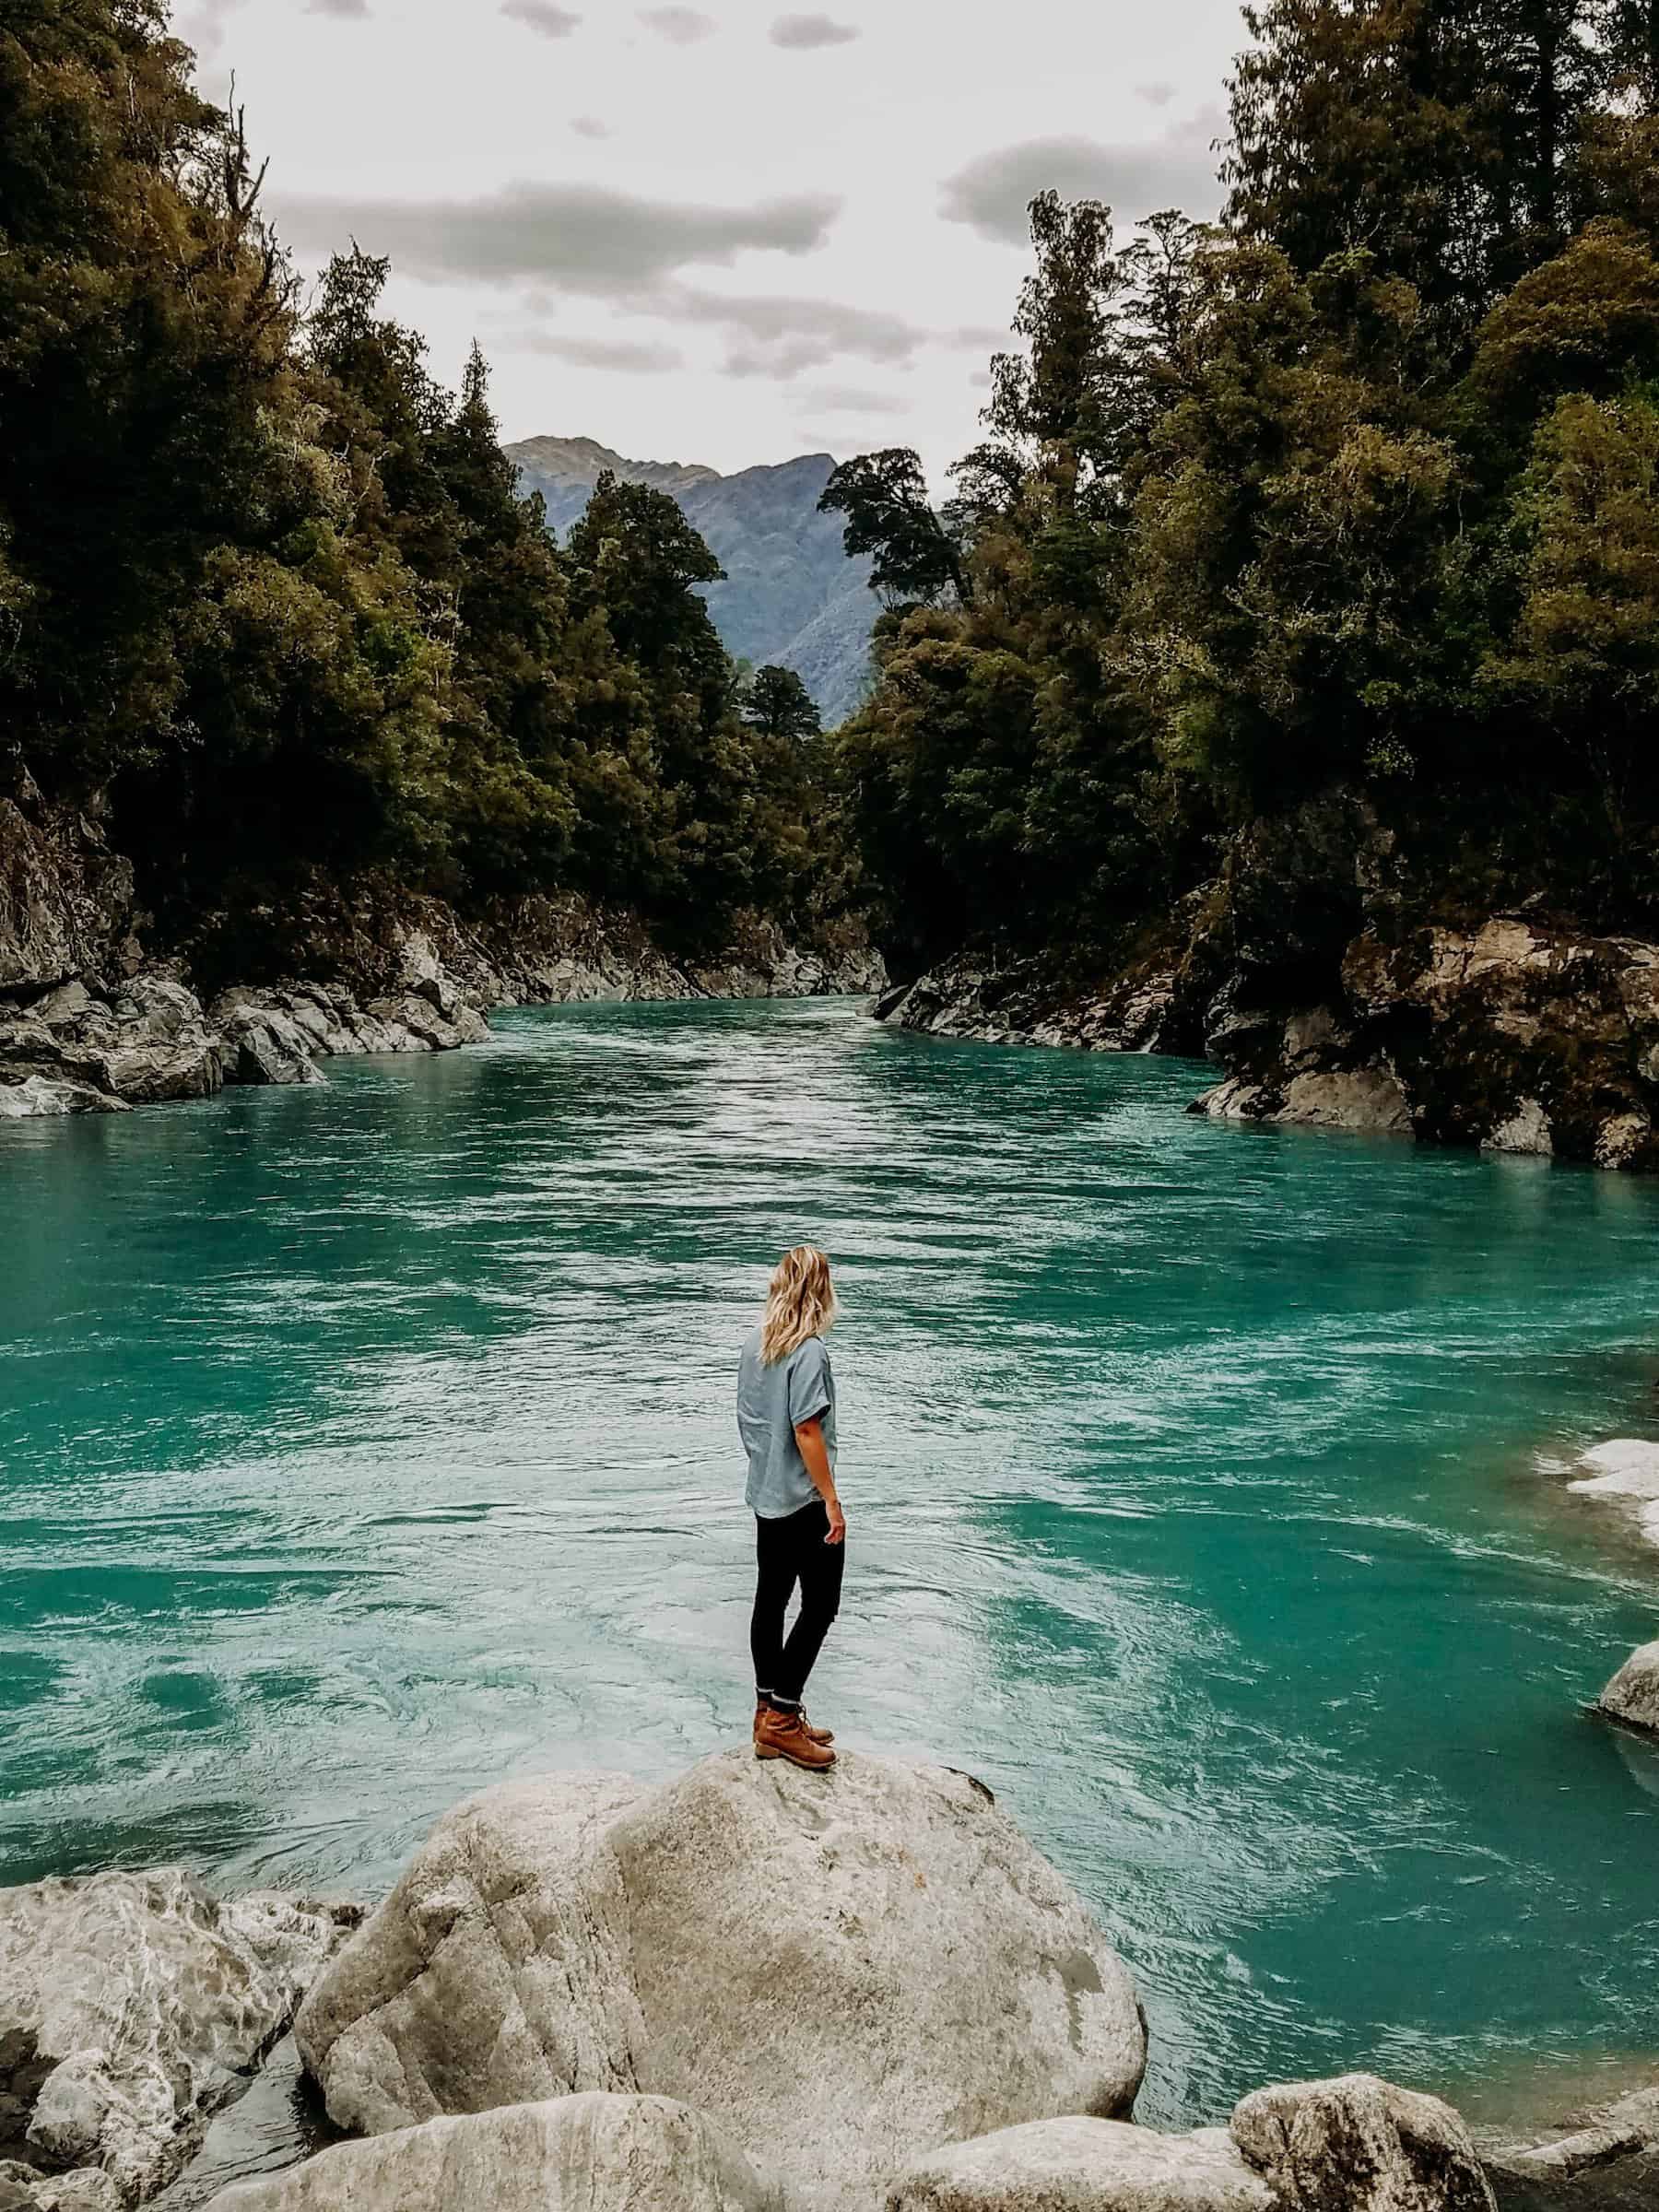 A Hiker Standing On a Rocky Outcrop At The Hokitika Gorge Looking Out To The Turquoise Blue Glacial River Fringed By White Granie Rock And Native Podocard Rainforest On The West Coast Of New Zealand